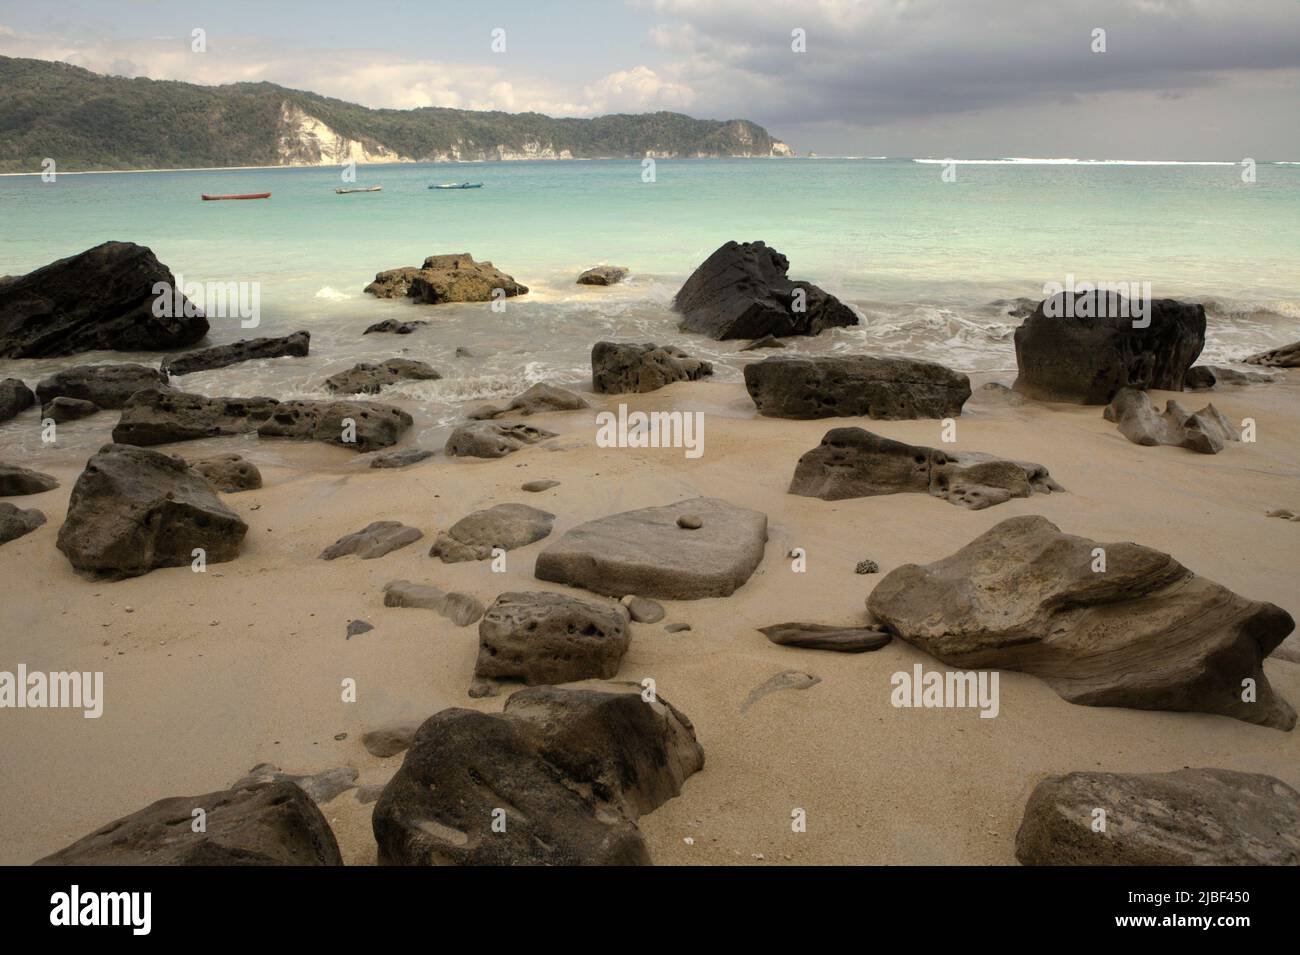 Rocks on sandy beach of Tarimbang in Tabundung, East Sumba, East Nusa Tenggara, Indonesia. This beach could be among the half of sandy beaches in the world that could disappear by the end of century if climate change continues unmitigated, as reported by climate scientists in their March 2020 publication on Nature Climate Change. Stock Photo